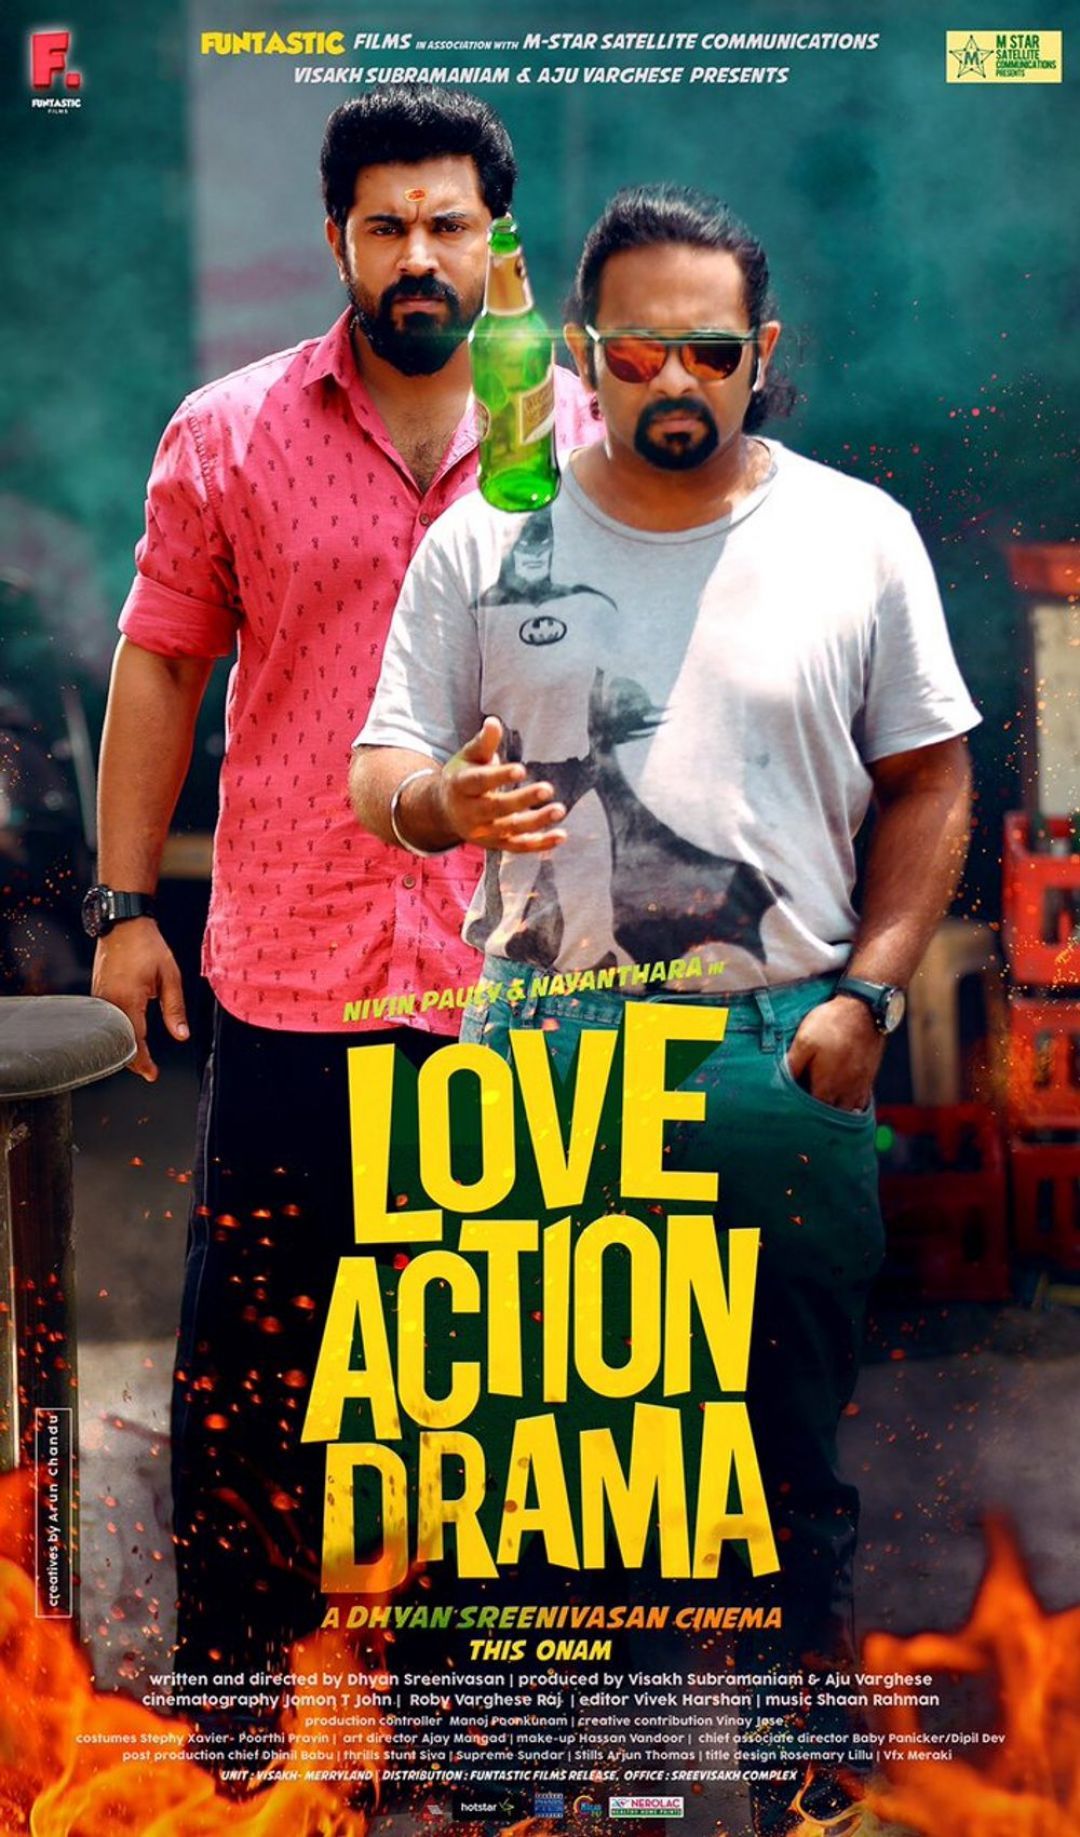 Nivin Pauly and Nayanthara starred Love Action Drama Movie HD Photos and posters (44) - Nivin Pauly, Aju Varghese, Love Action Drama (2019)